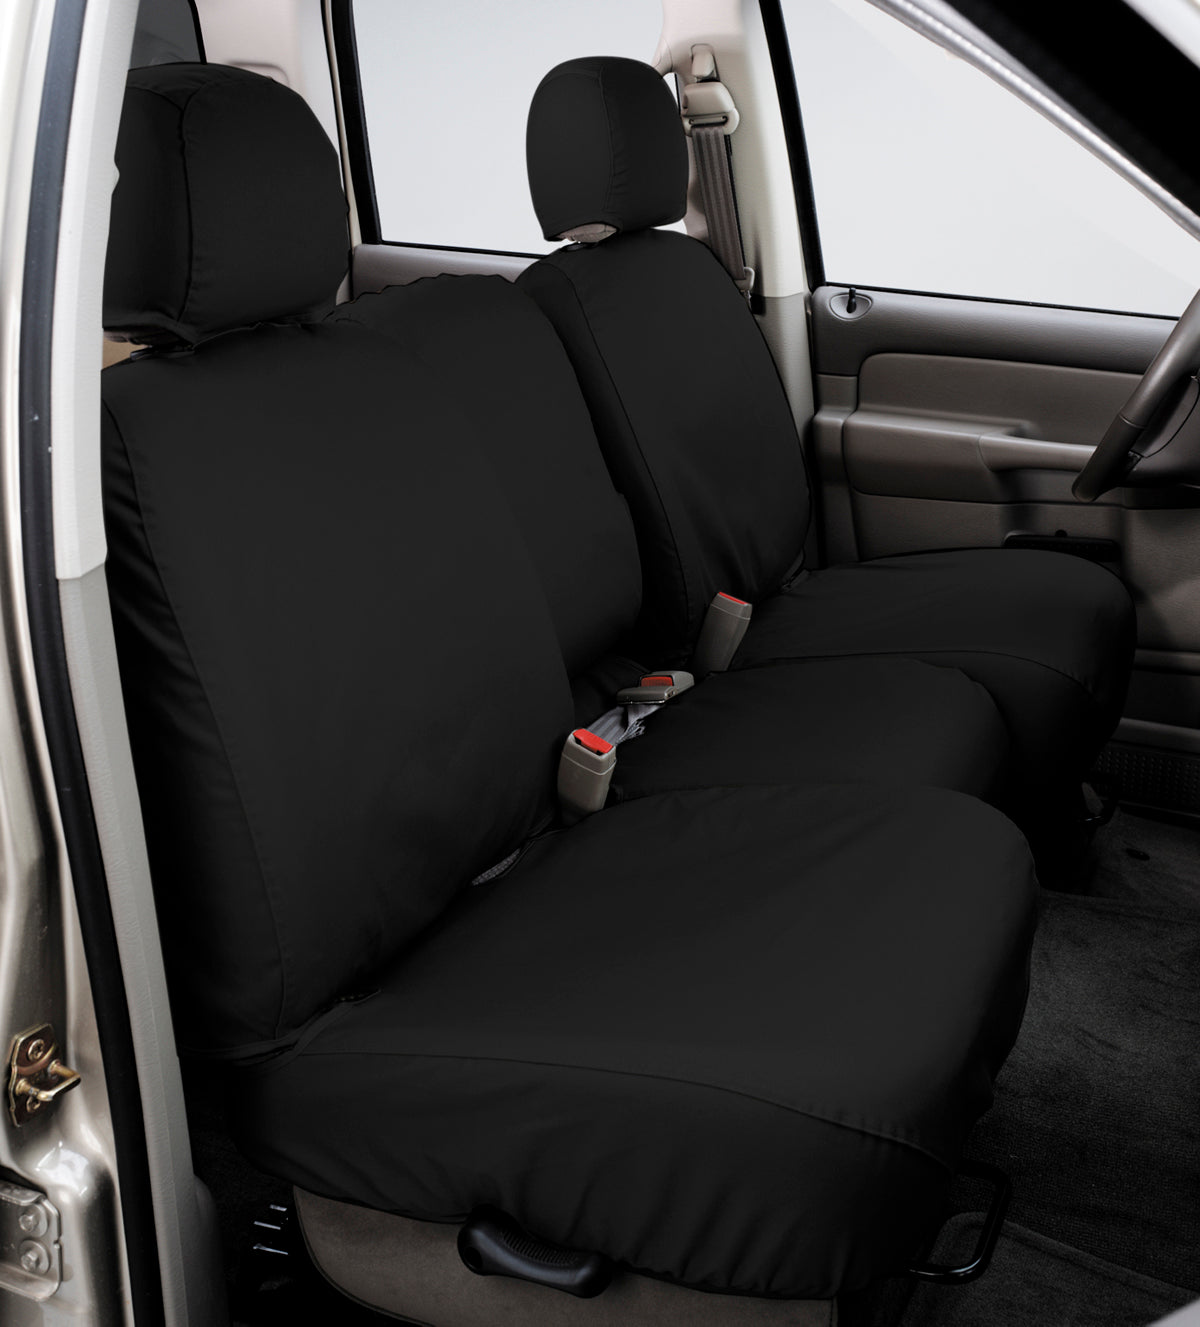 Covercraft Seat Cover for Ford F-150, Ford F-550 Super Duty